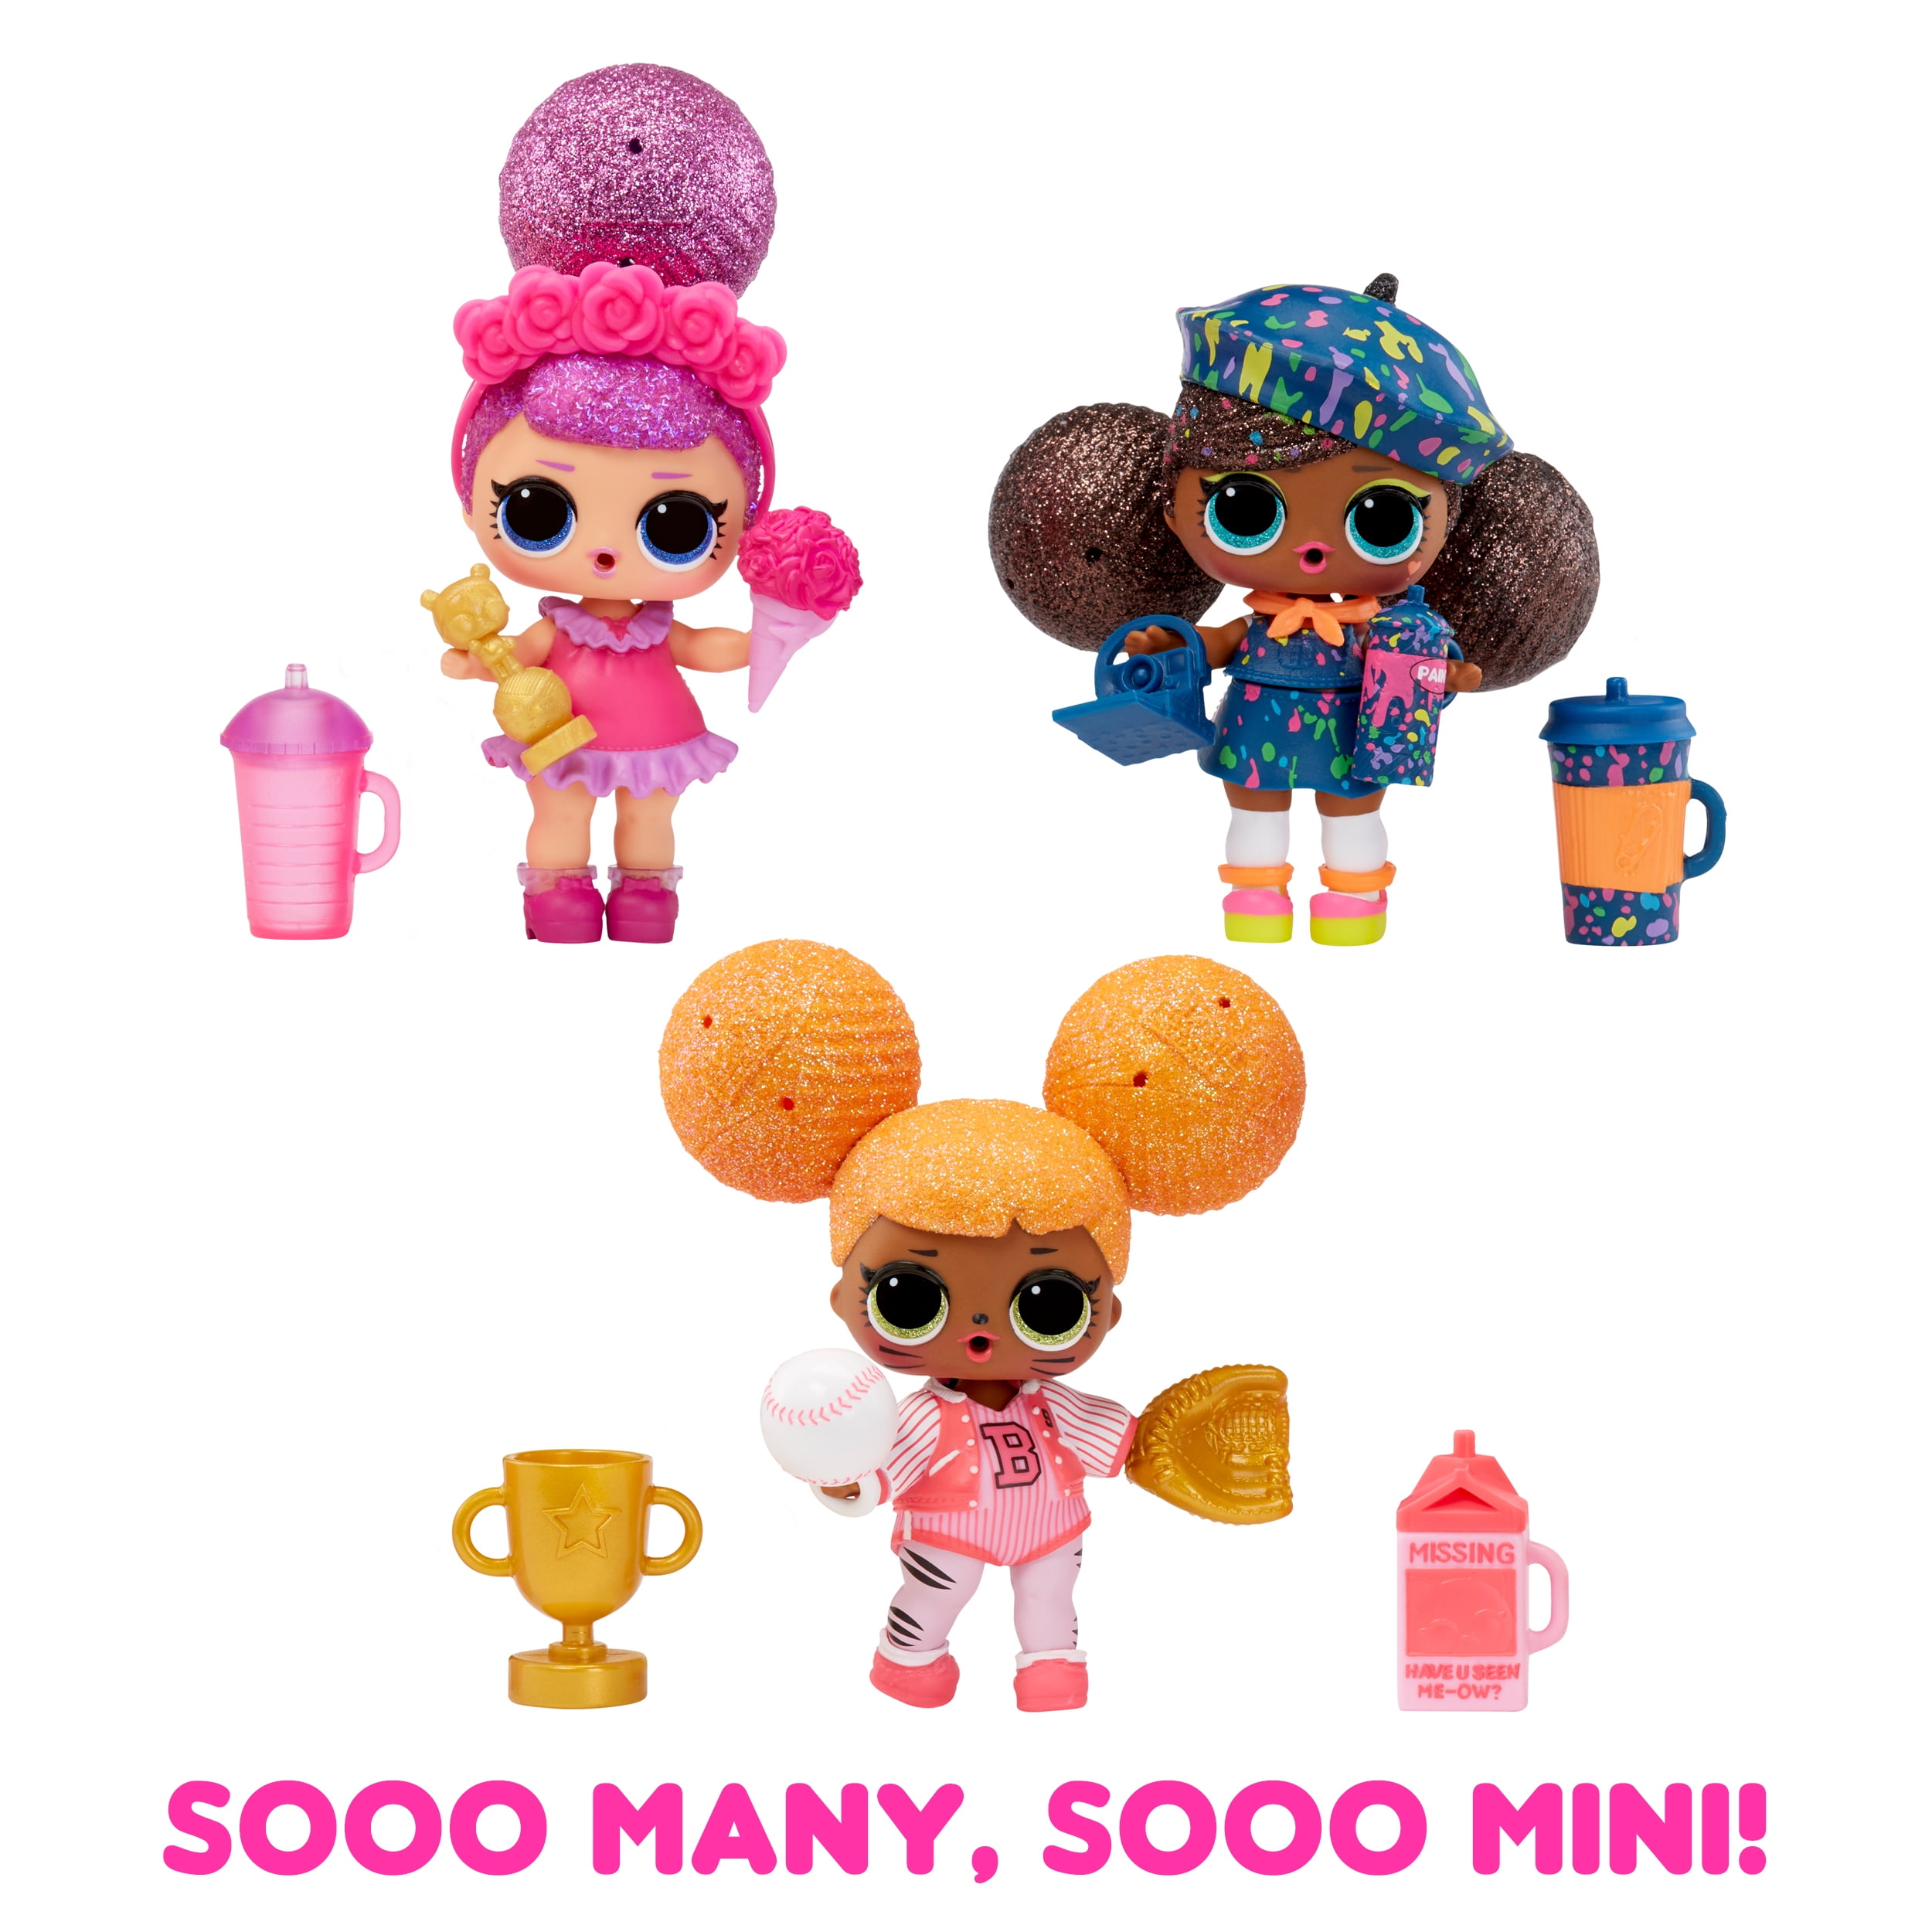 Sooo Mini! LOL Surprise Lil Sisters- with Collectible Lil Sister Doll, 5  Surprises, Mini L.O.L. Surprise Ball, Limited Edition Dolls- Great gift for